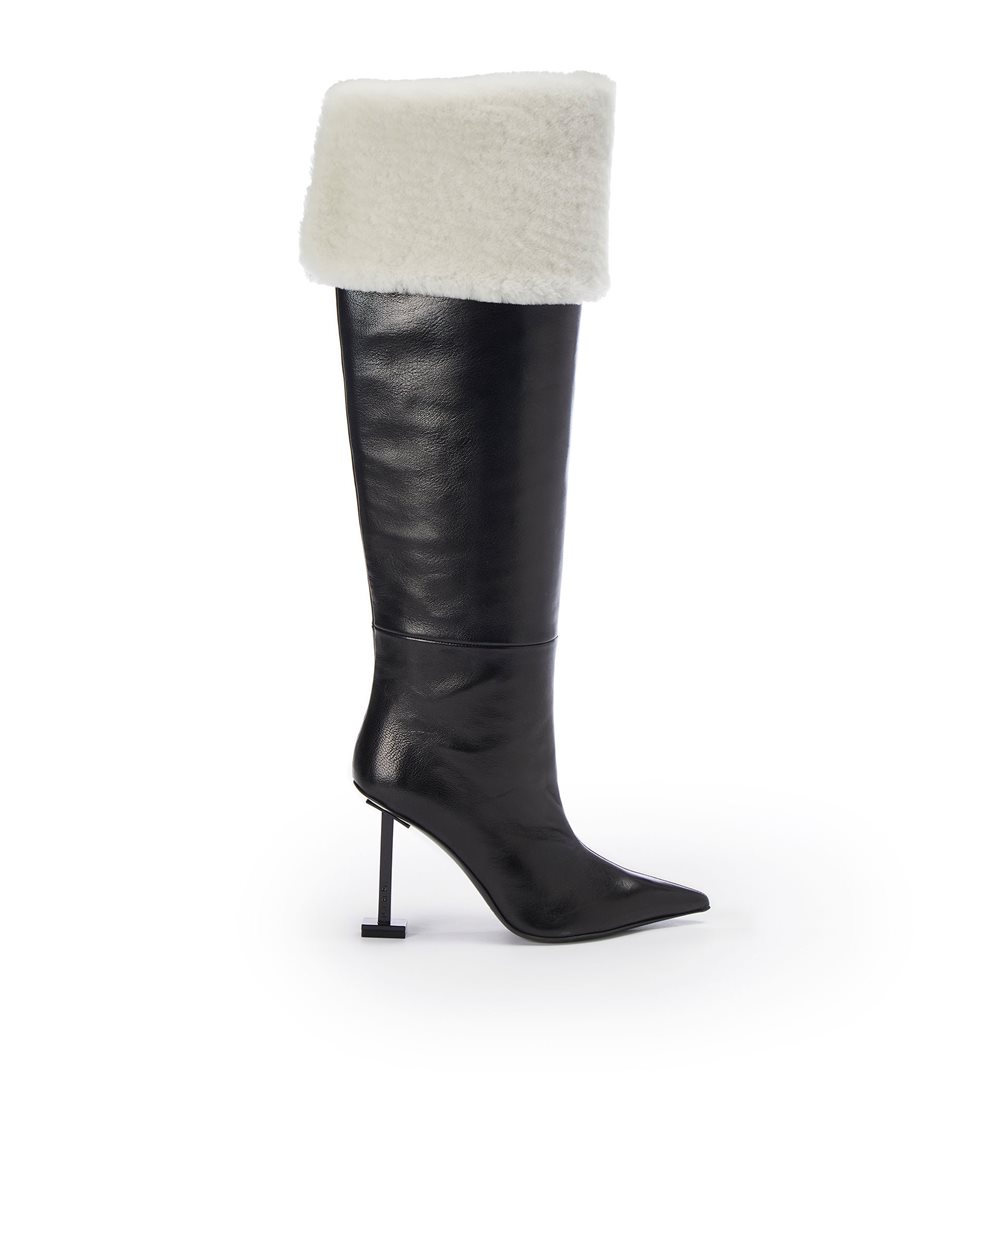 Leather boots with heels | Iceberg - Official Website